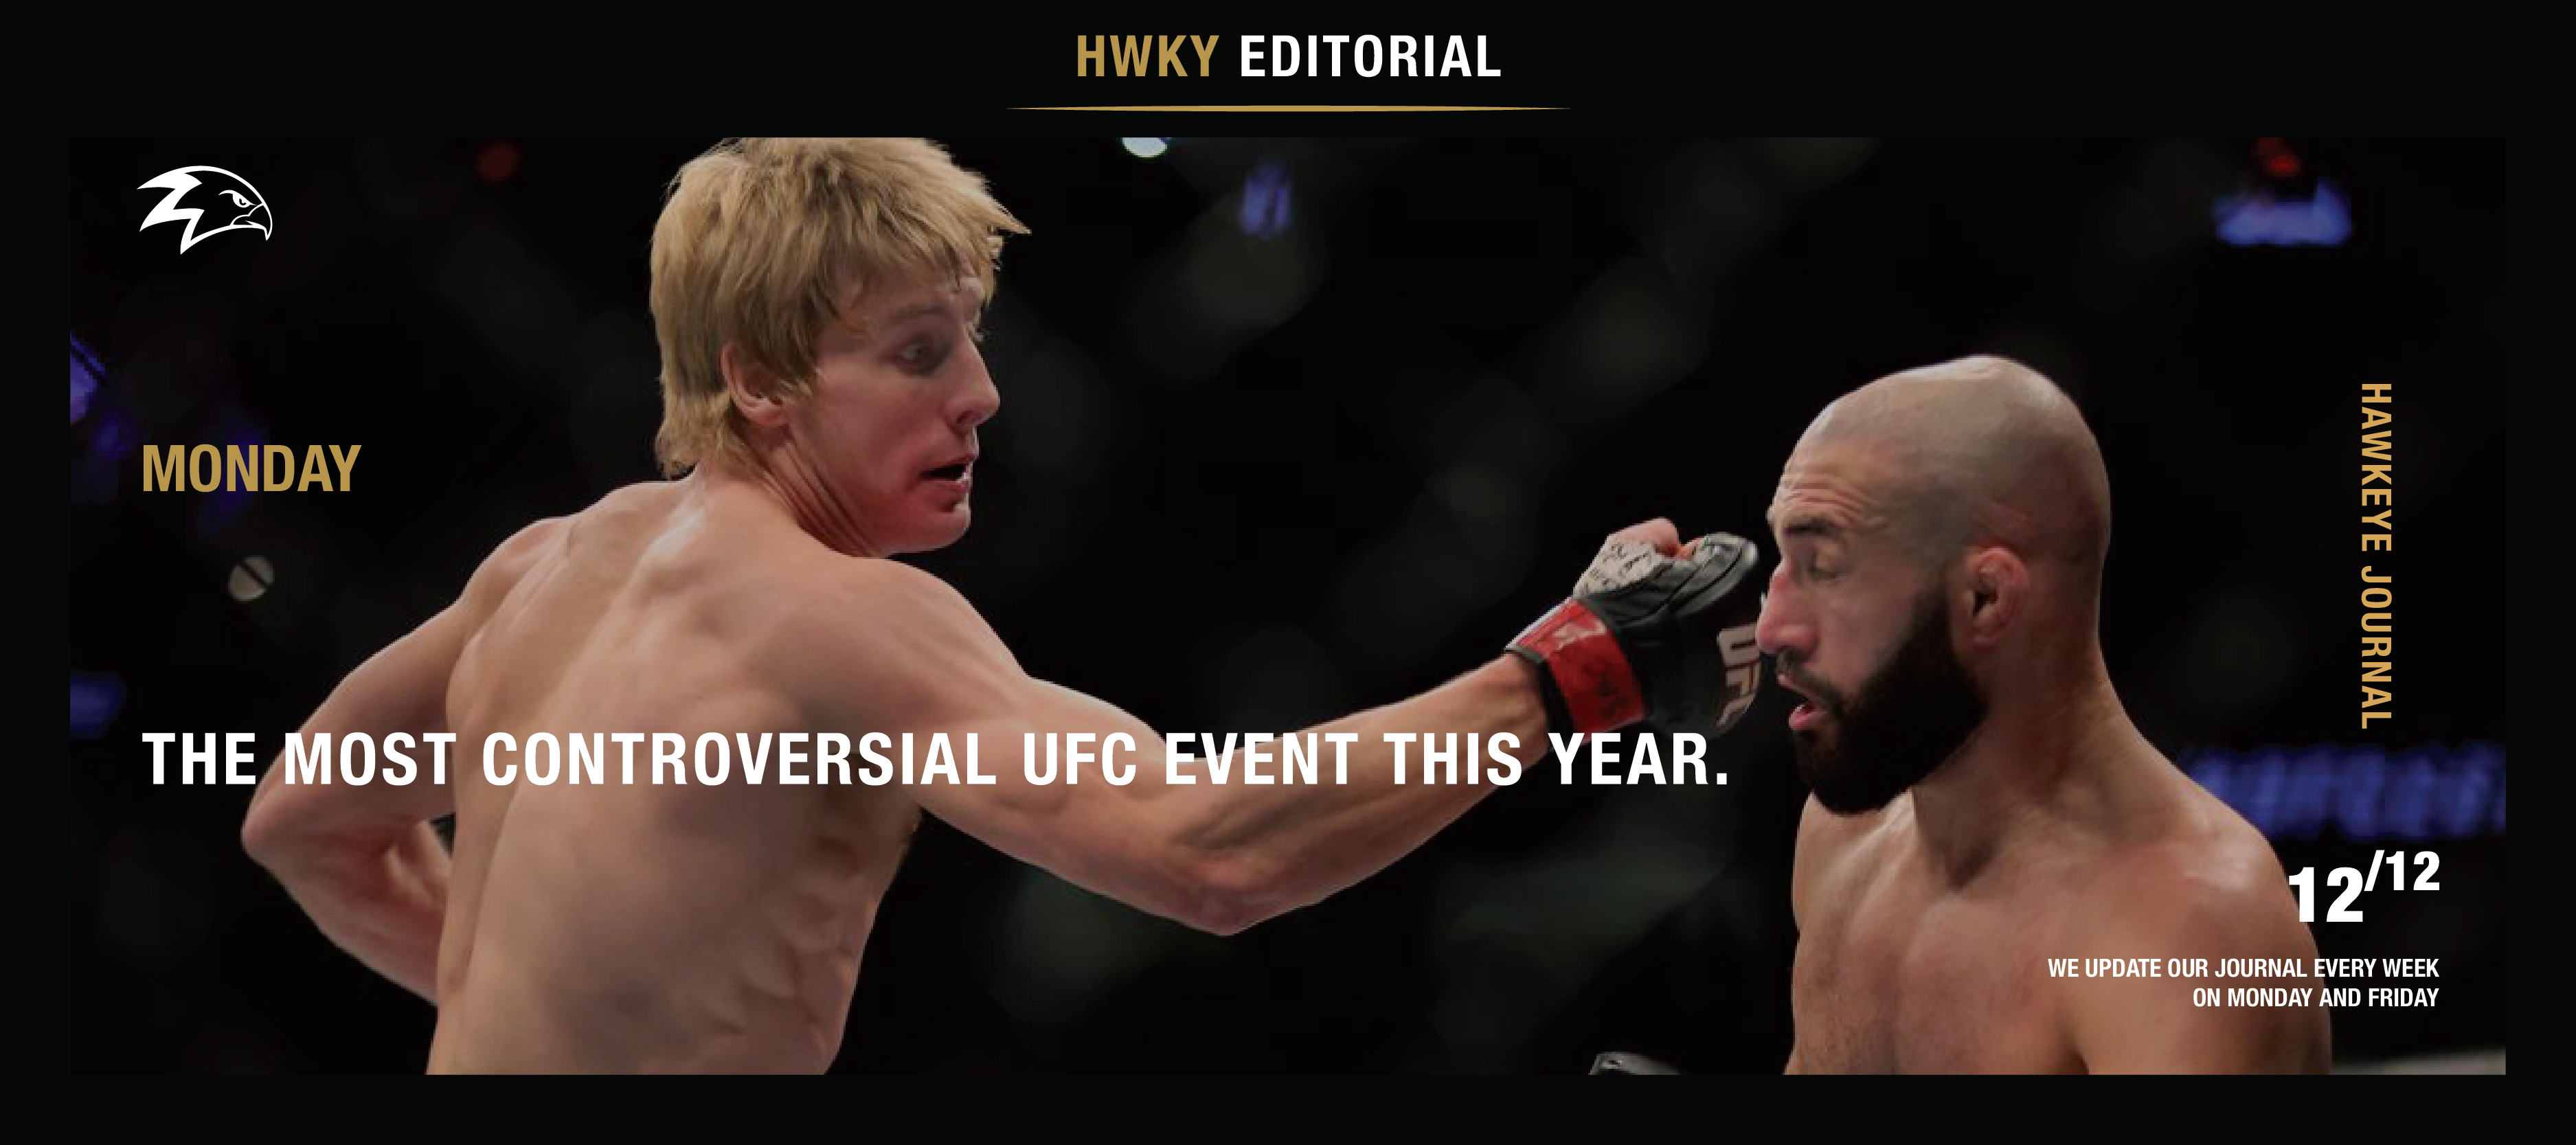 The Most Controversial UFC Event This Year.